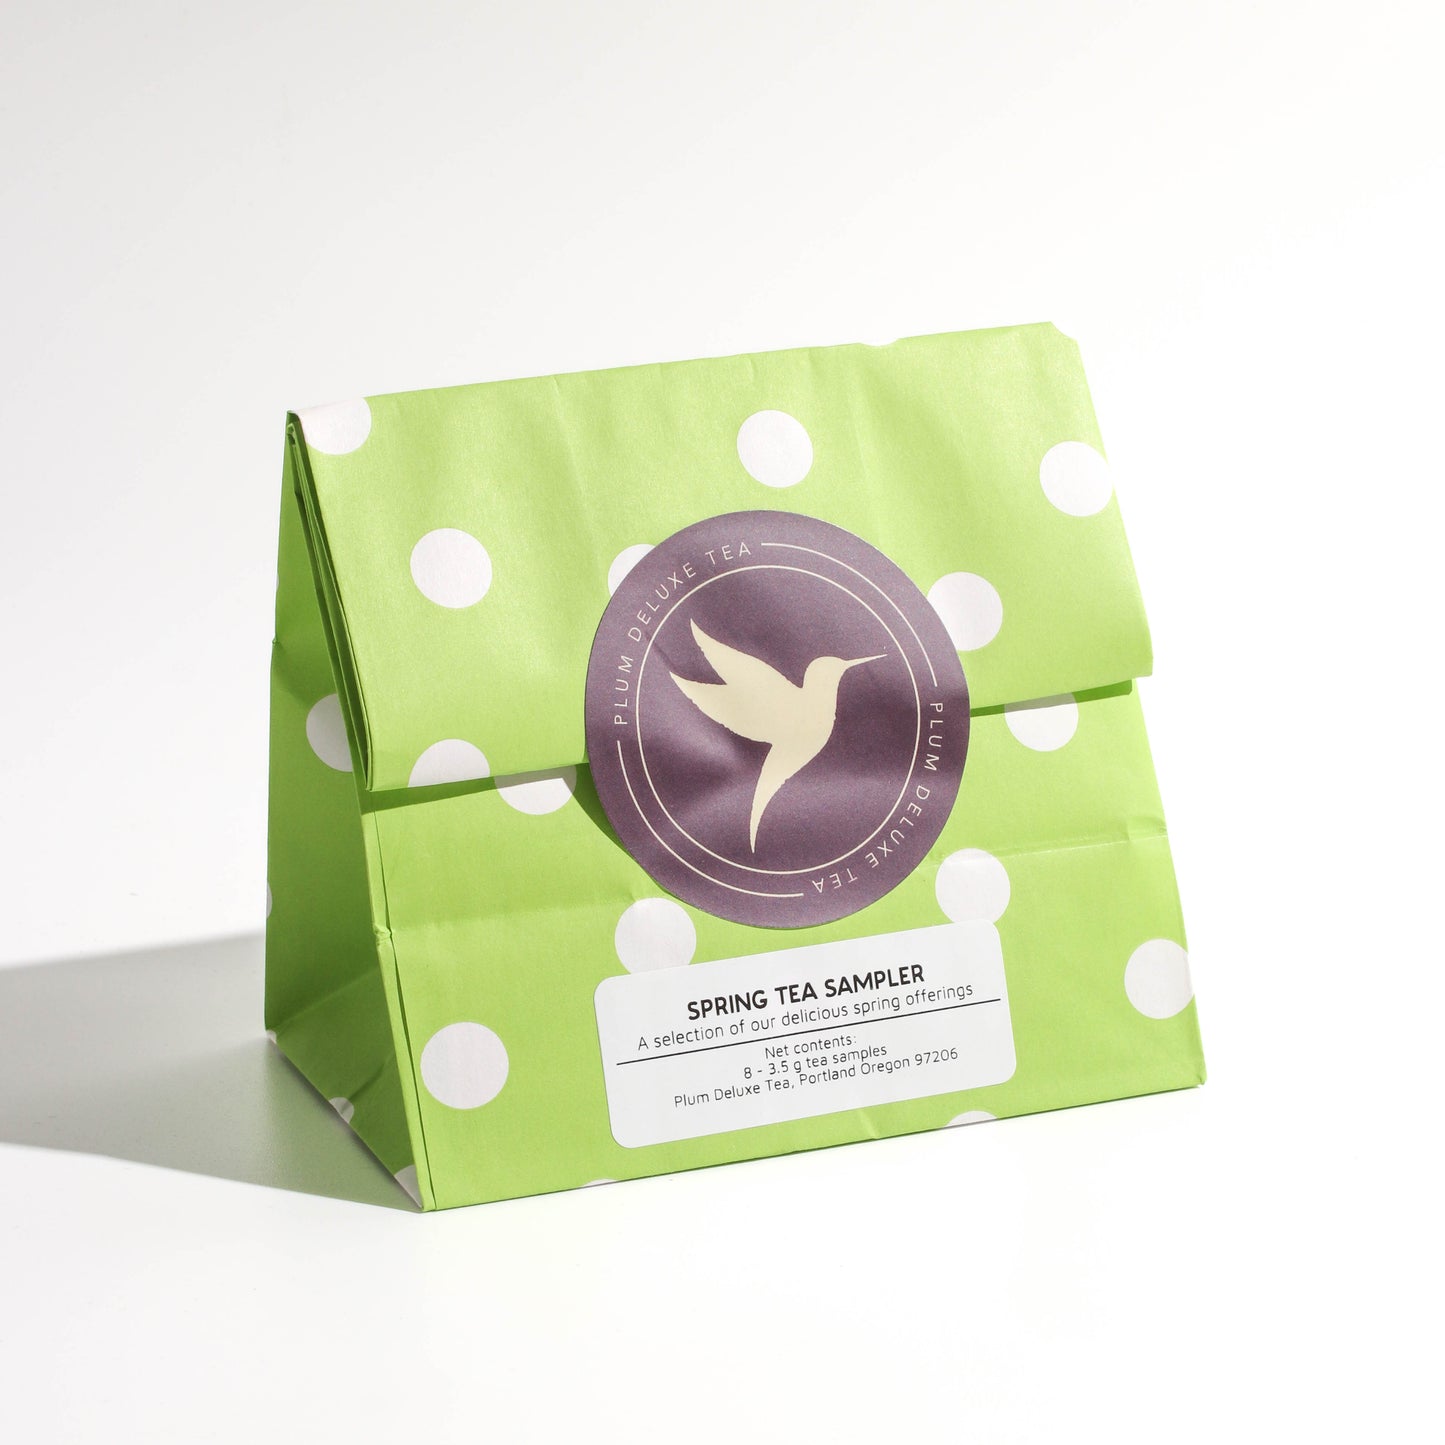 A green bag of spring tea samples, sealed with a purple hummingbird sticker, on a white background